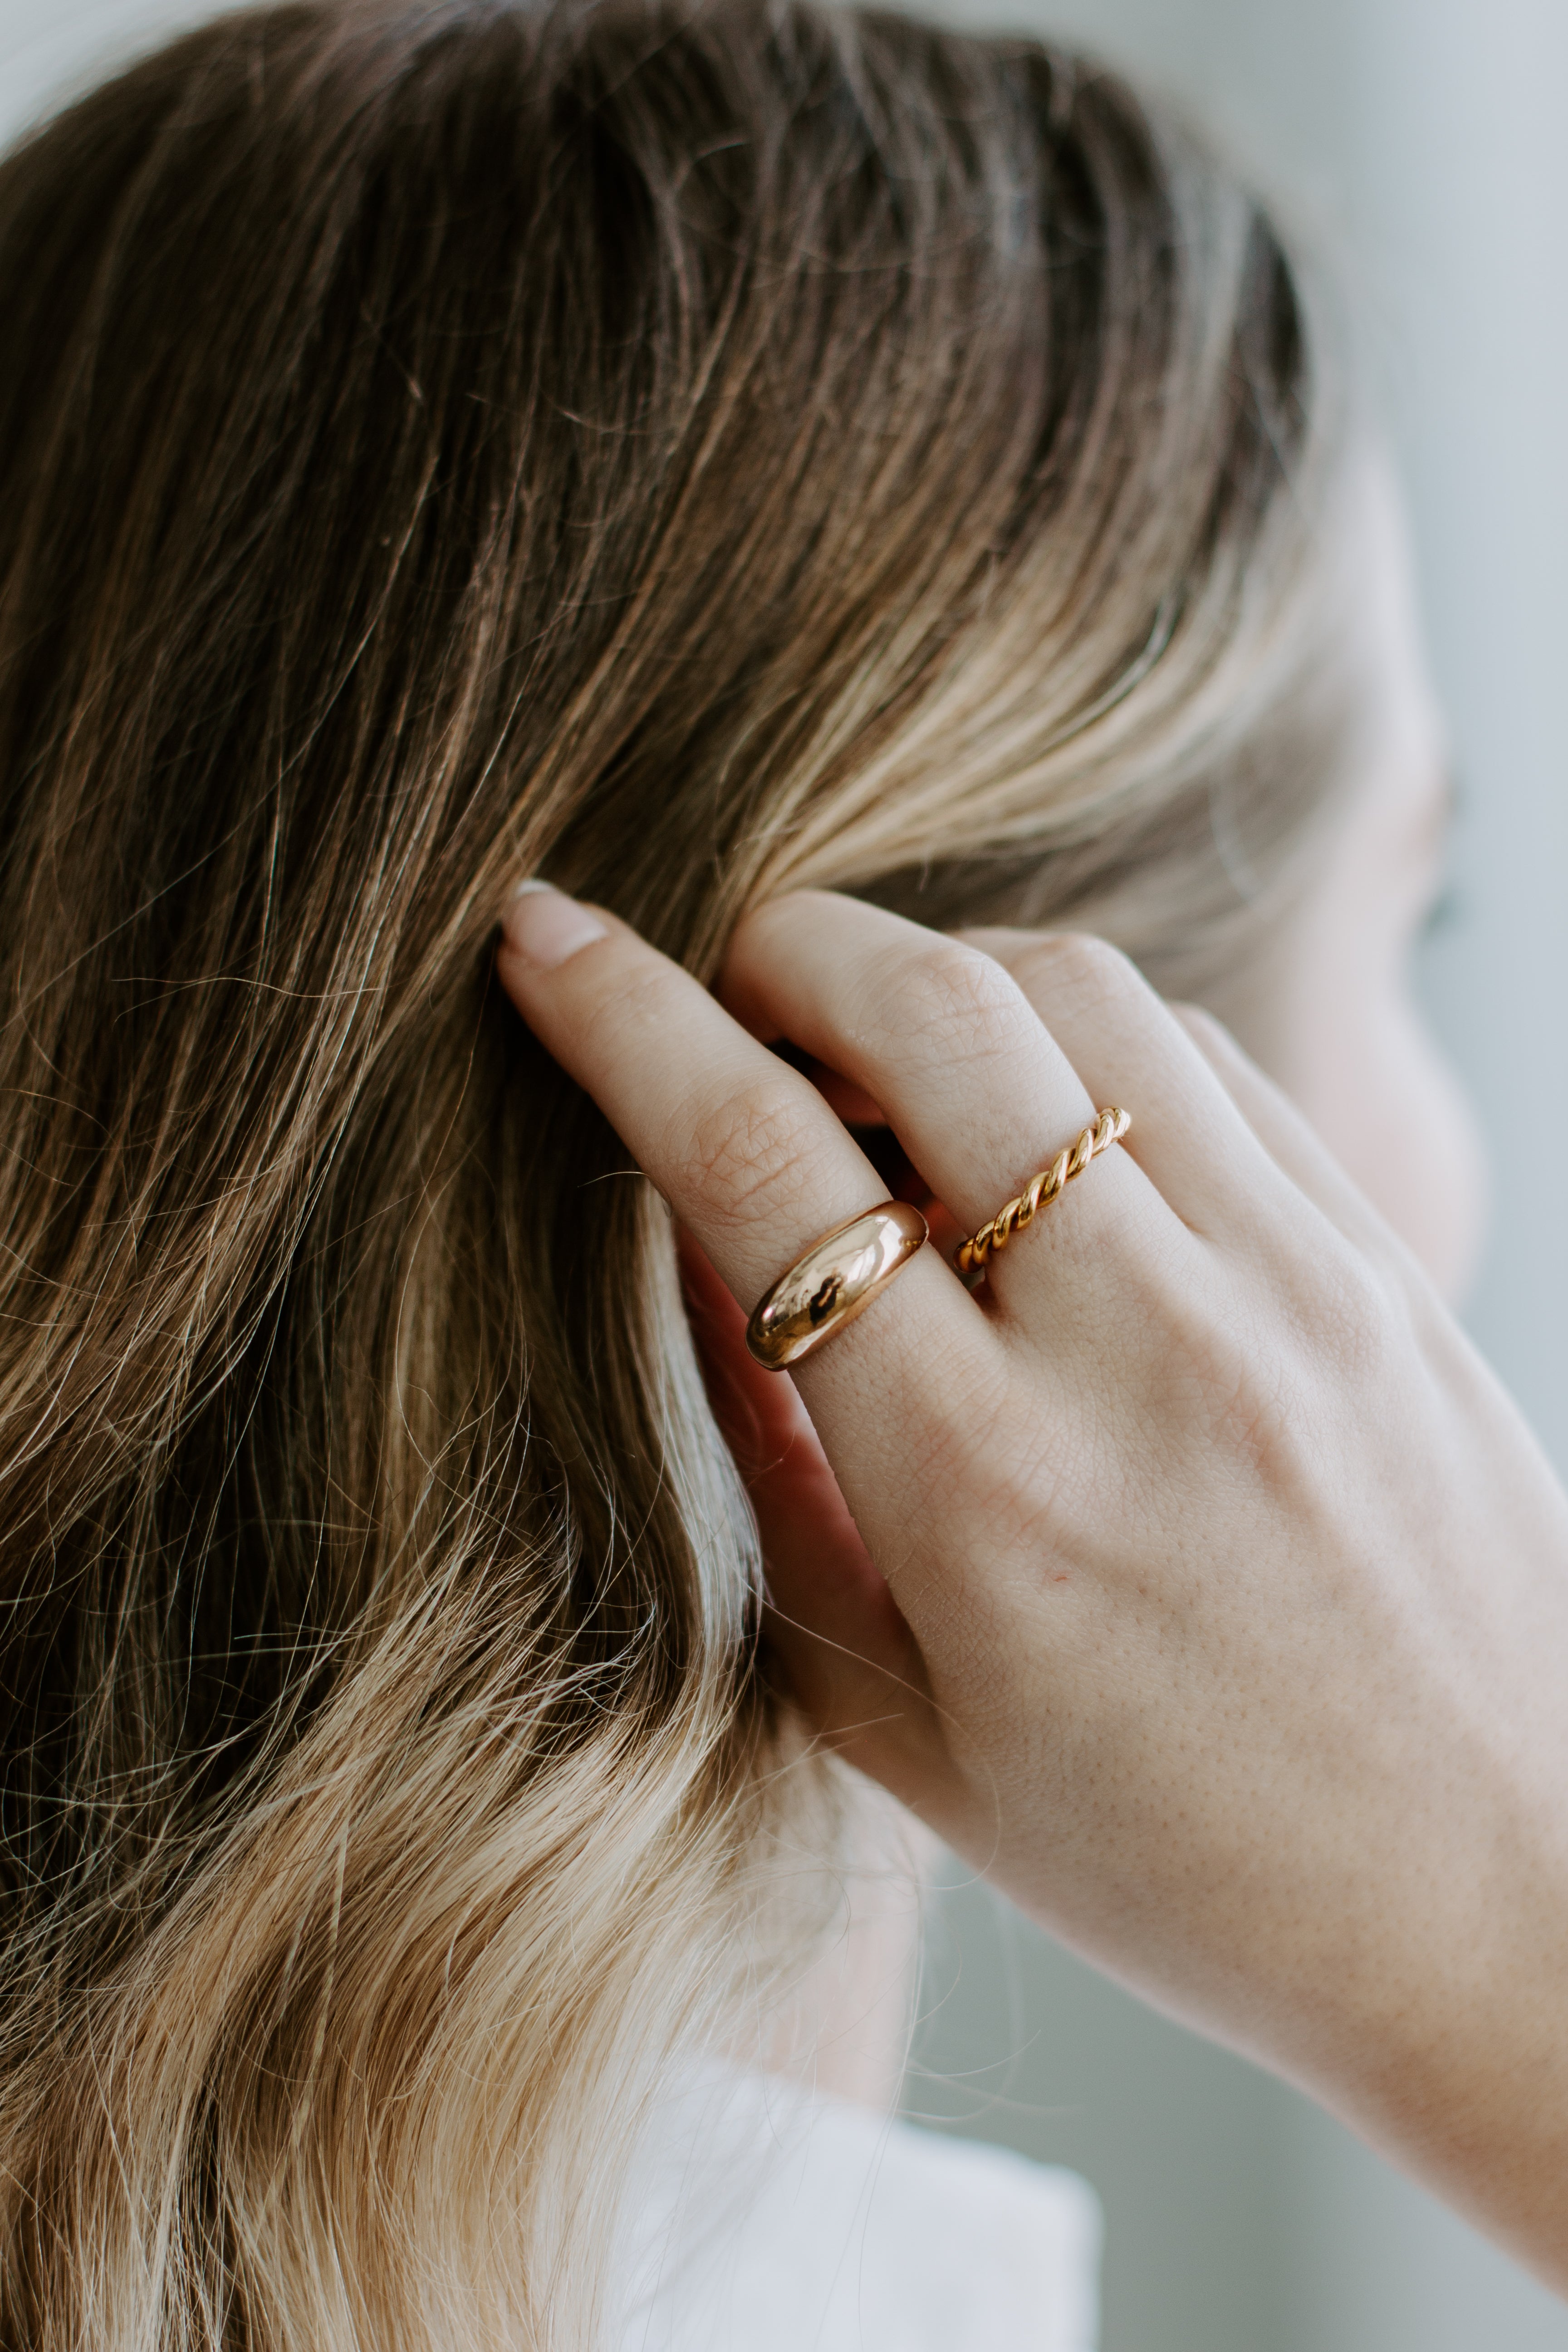 A chic, heightened domed ring to elevate your ring stack! 14K Gold Plated Hypoallergenic Tarnish Resistant Size variations: one size, size 6, 7, 8 | Julia Ring | Non-tarnish 14k Jewellery EasyClubCo